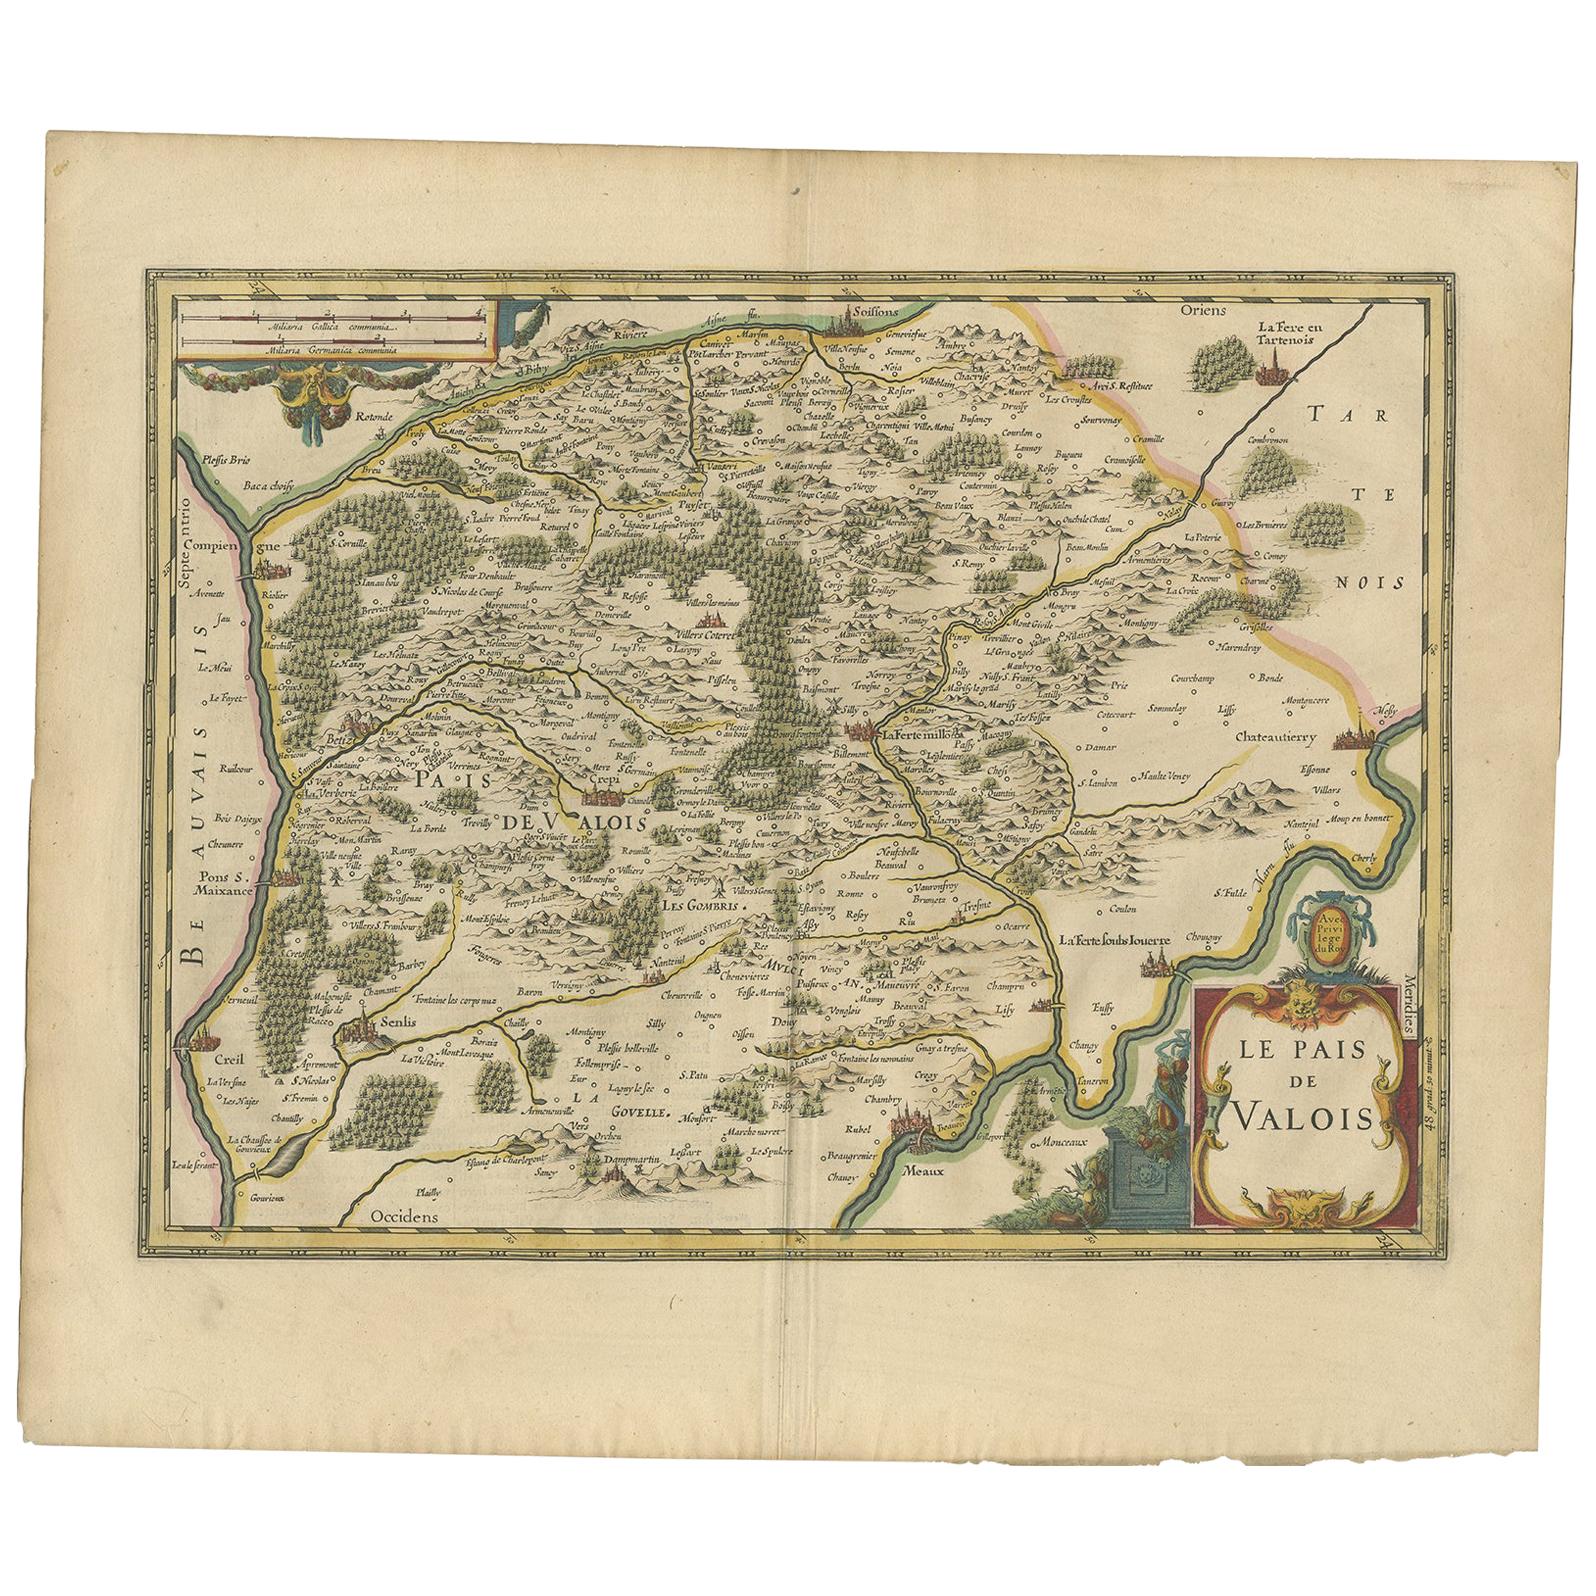 Antique map titled 'Le Pais de Valois'. Old map of the historic region of Valois, France. It corresponds to the southeastern quarter of the modern département of Oise, with an adjacent portion of Aisne. This map originates from a composite atlas and